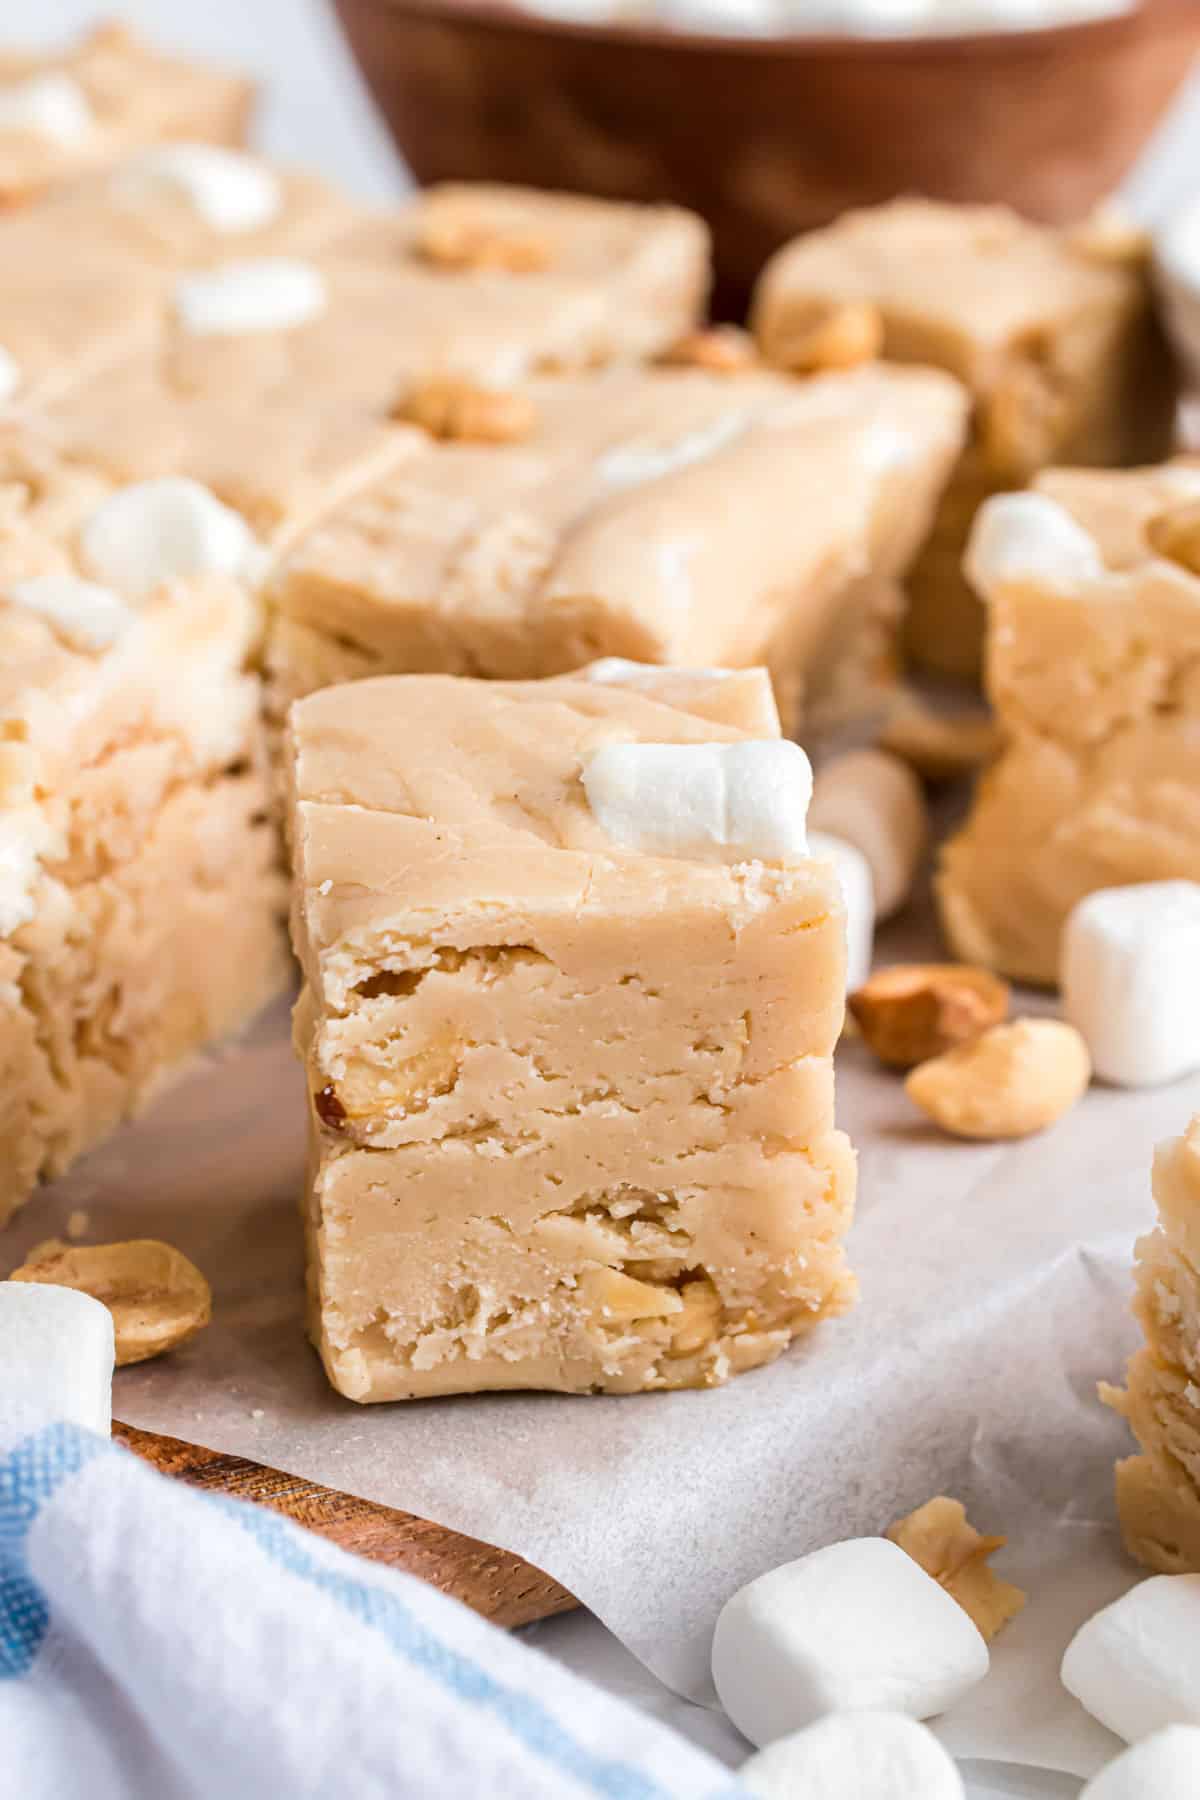 Piece of peanut butter fudge with marshmallow and peanuts on wooden cutting board lined with parchment paper.